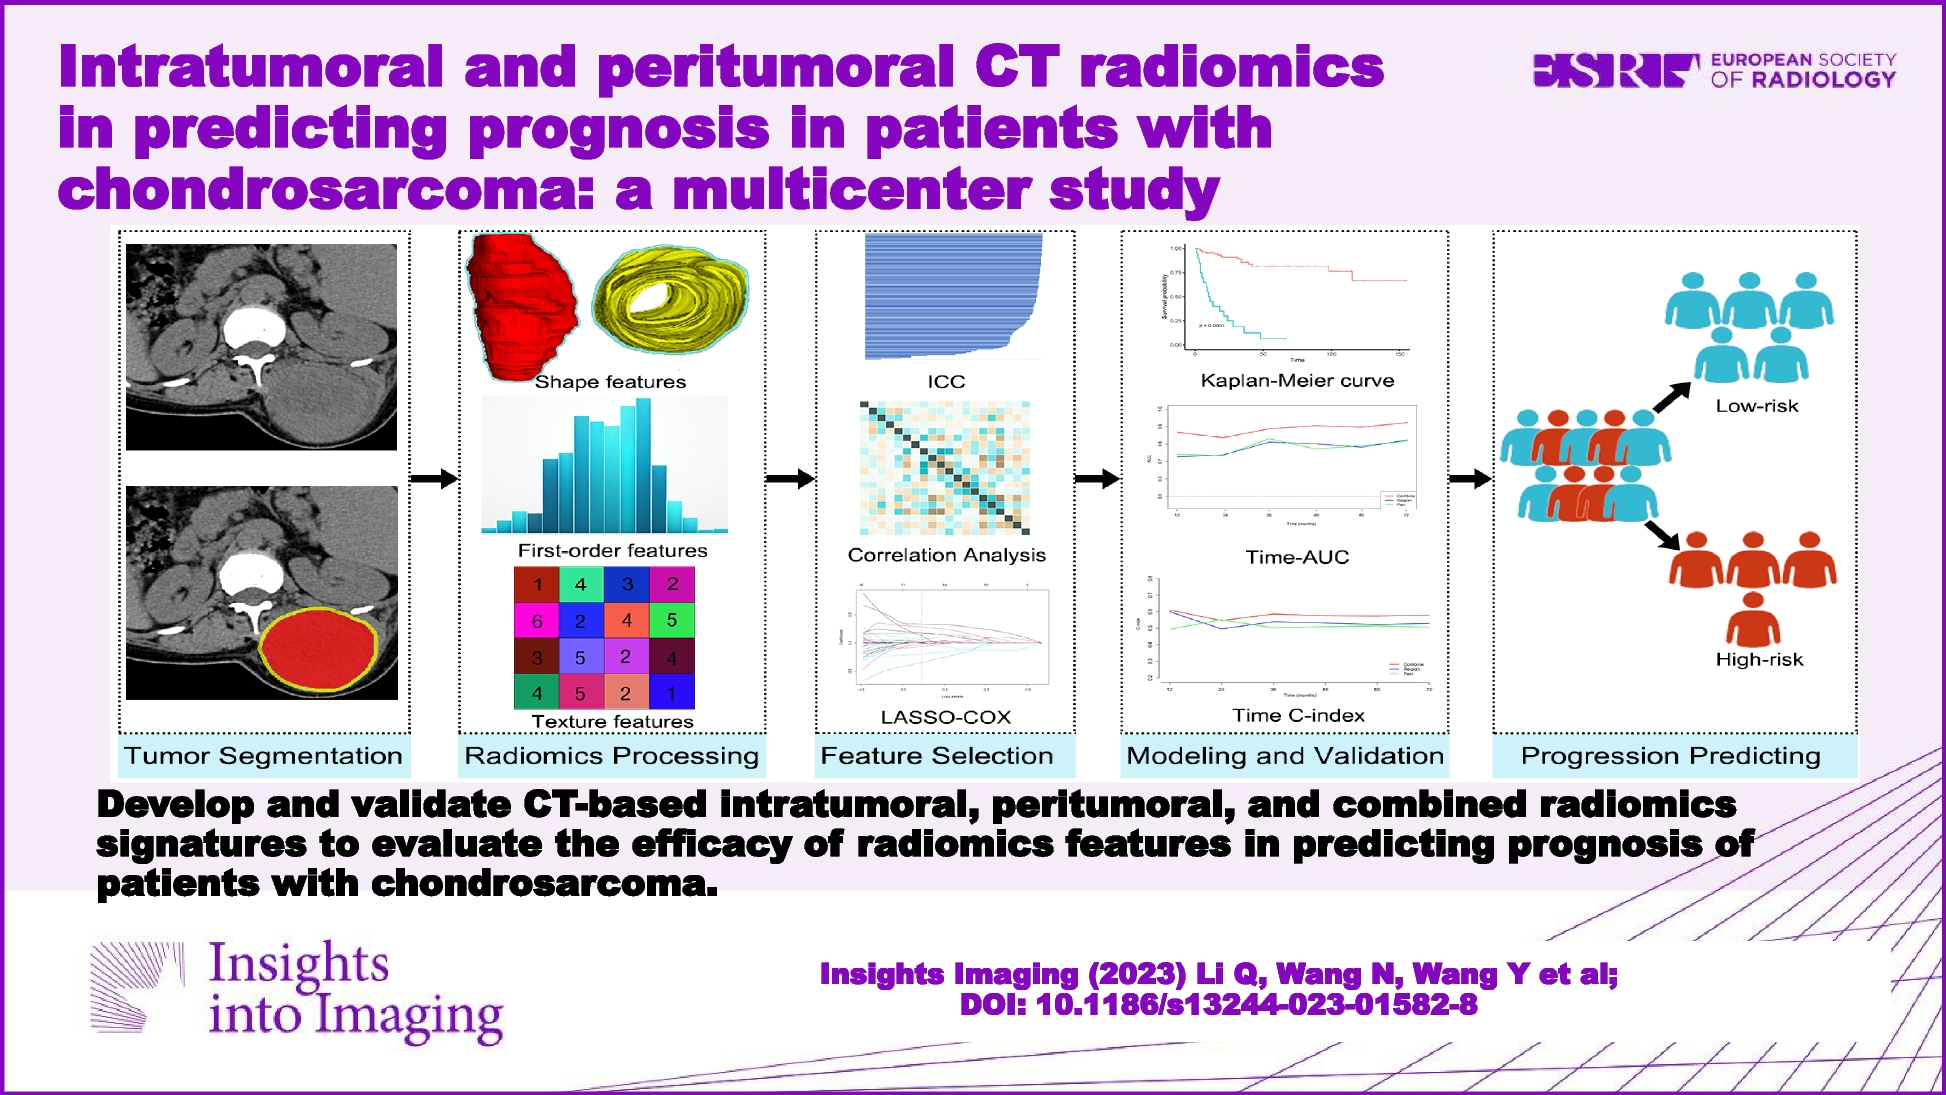 Intratumoral and peritumoral CT radiomics in predicting prognosis in patients with chondrosarcoma: a multicenter study